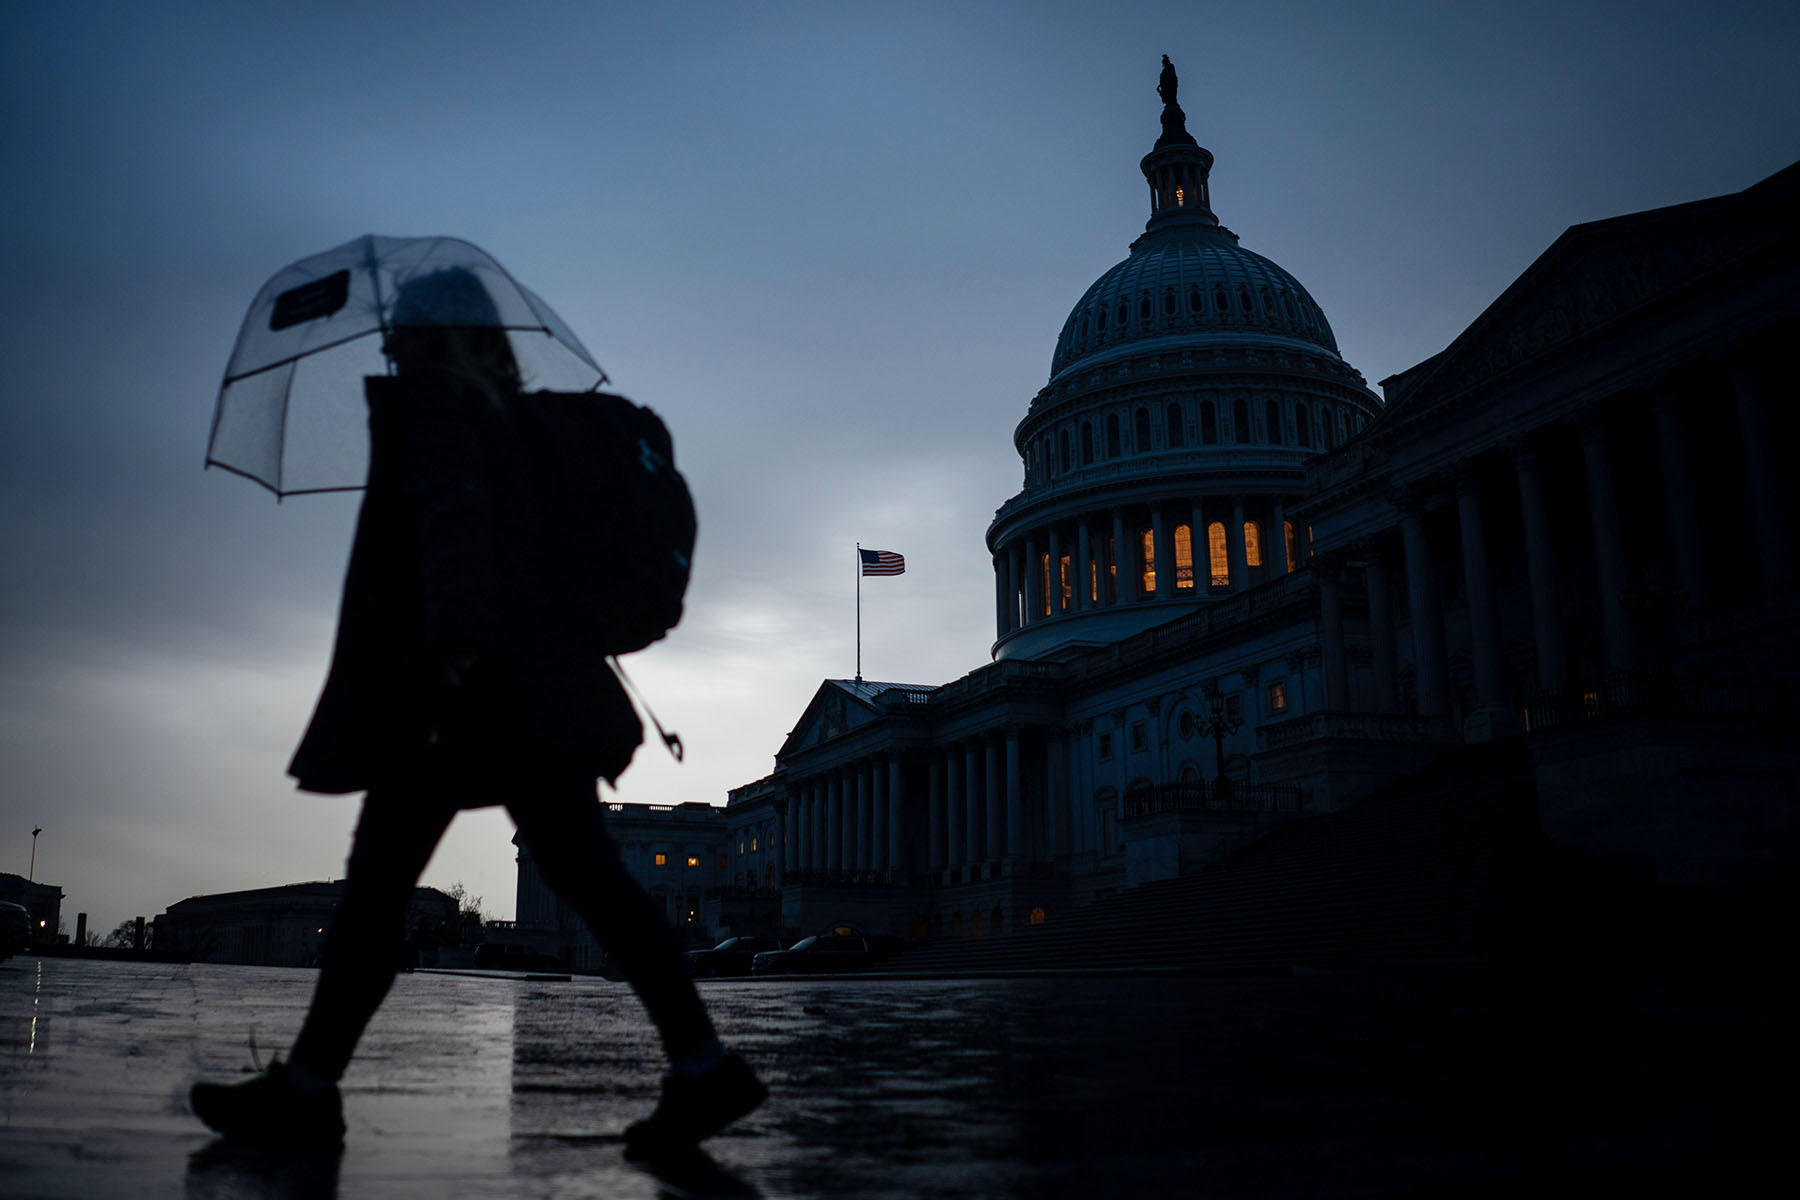 A pedestrian walks through the Capitol Plaza with the dome of the U.S. Capitol Building as a backdrop.